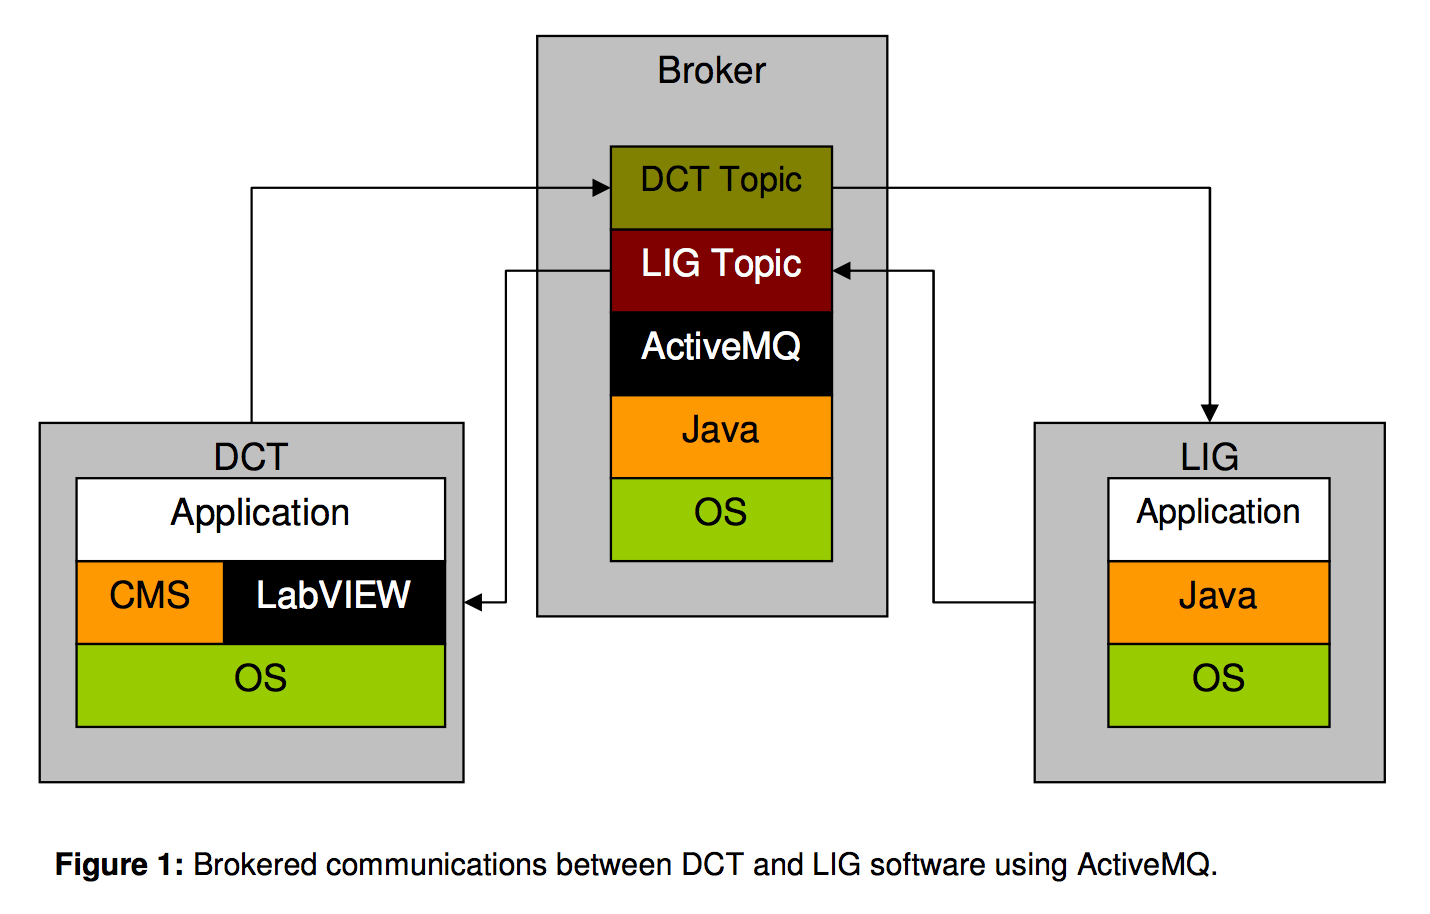 Brokered communications between DCT and LIG software using ActiveMQ.